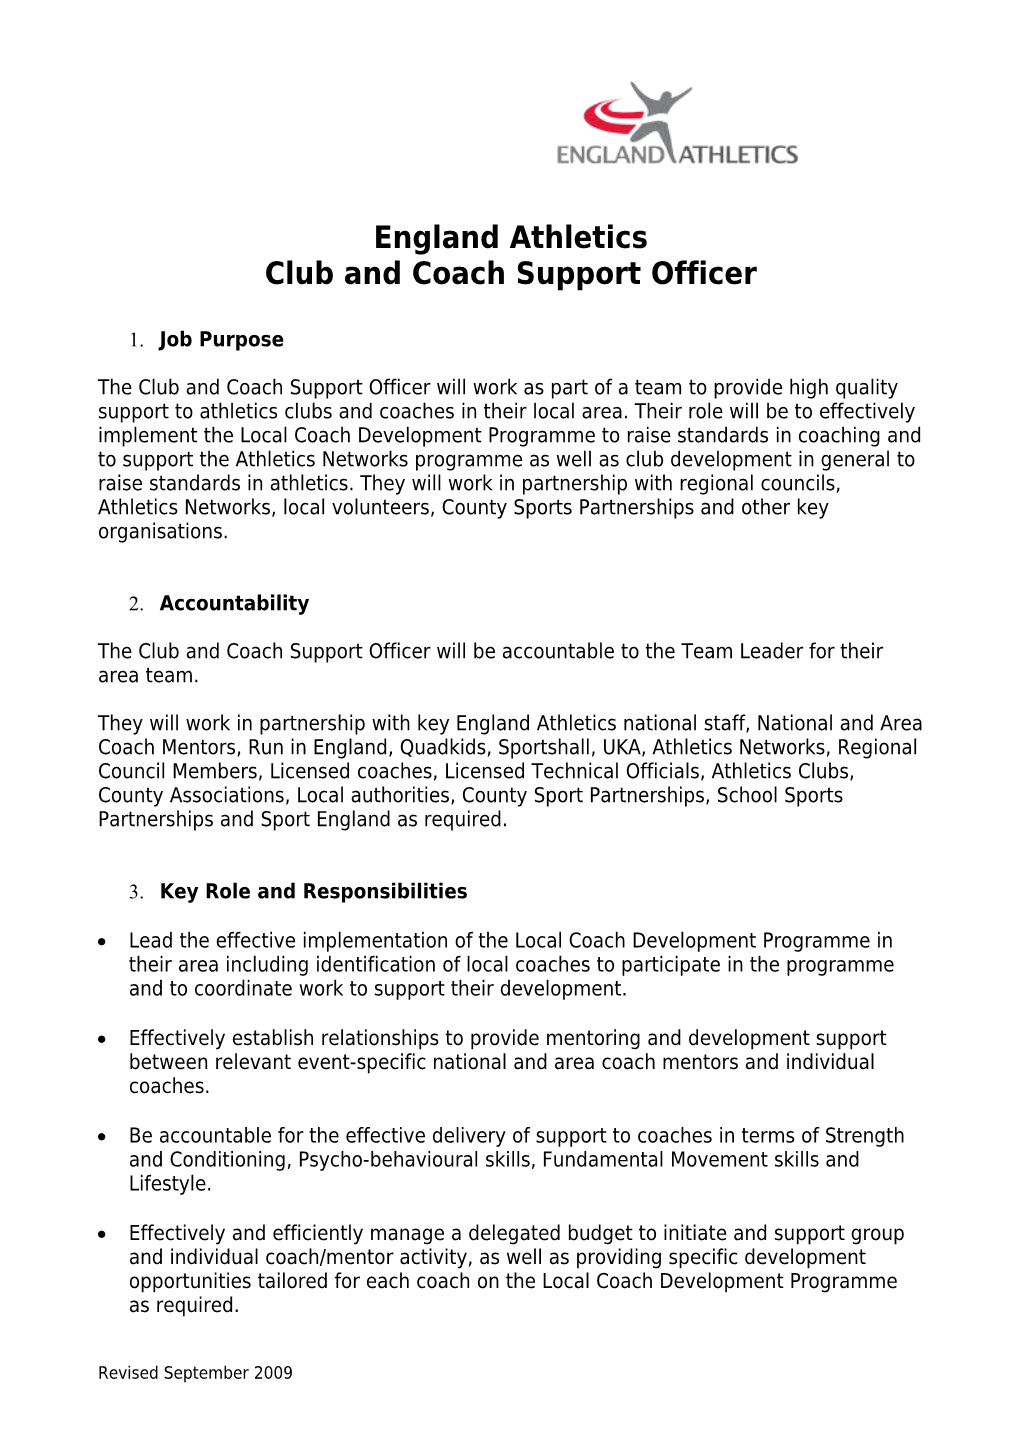 Club and Coach Support Officer